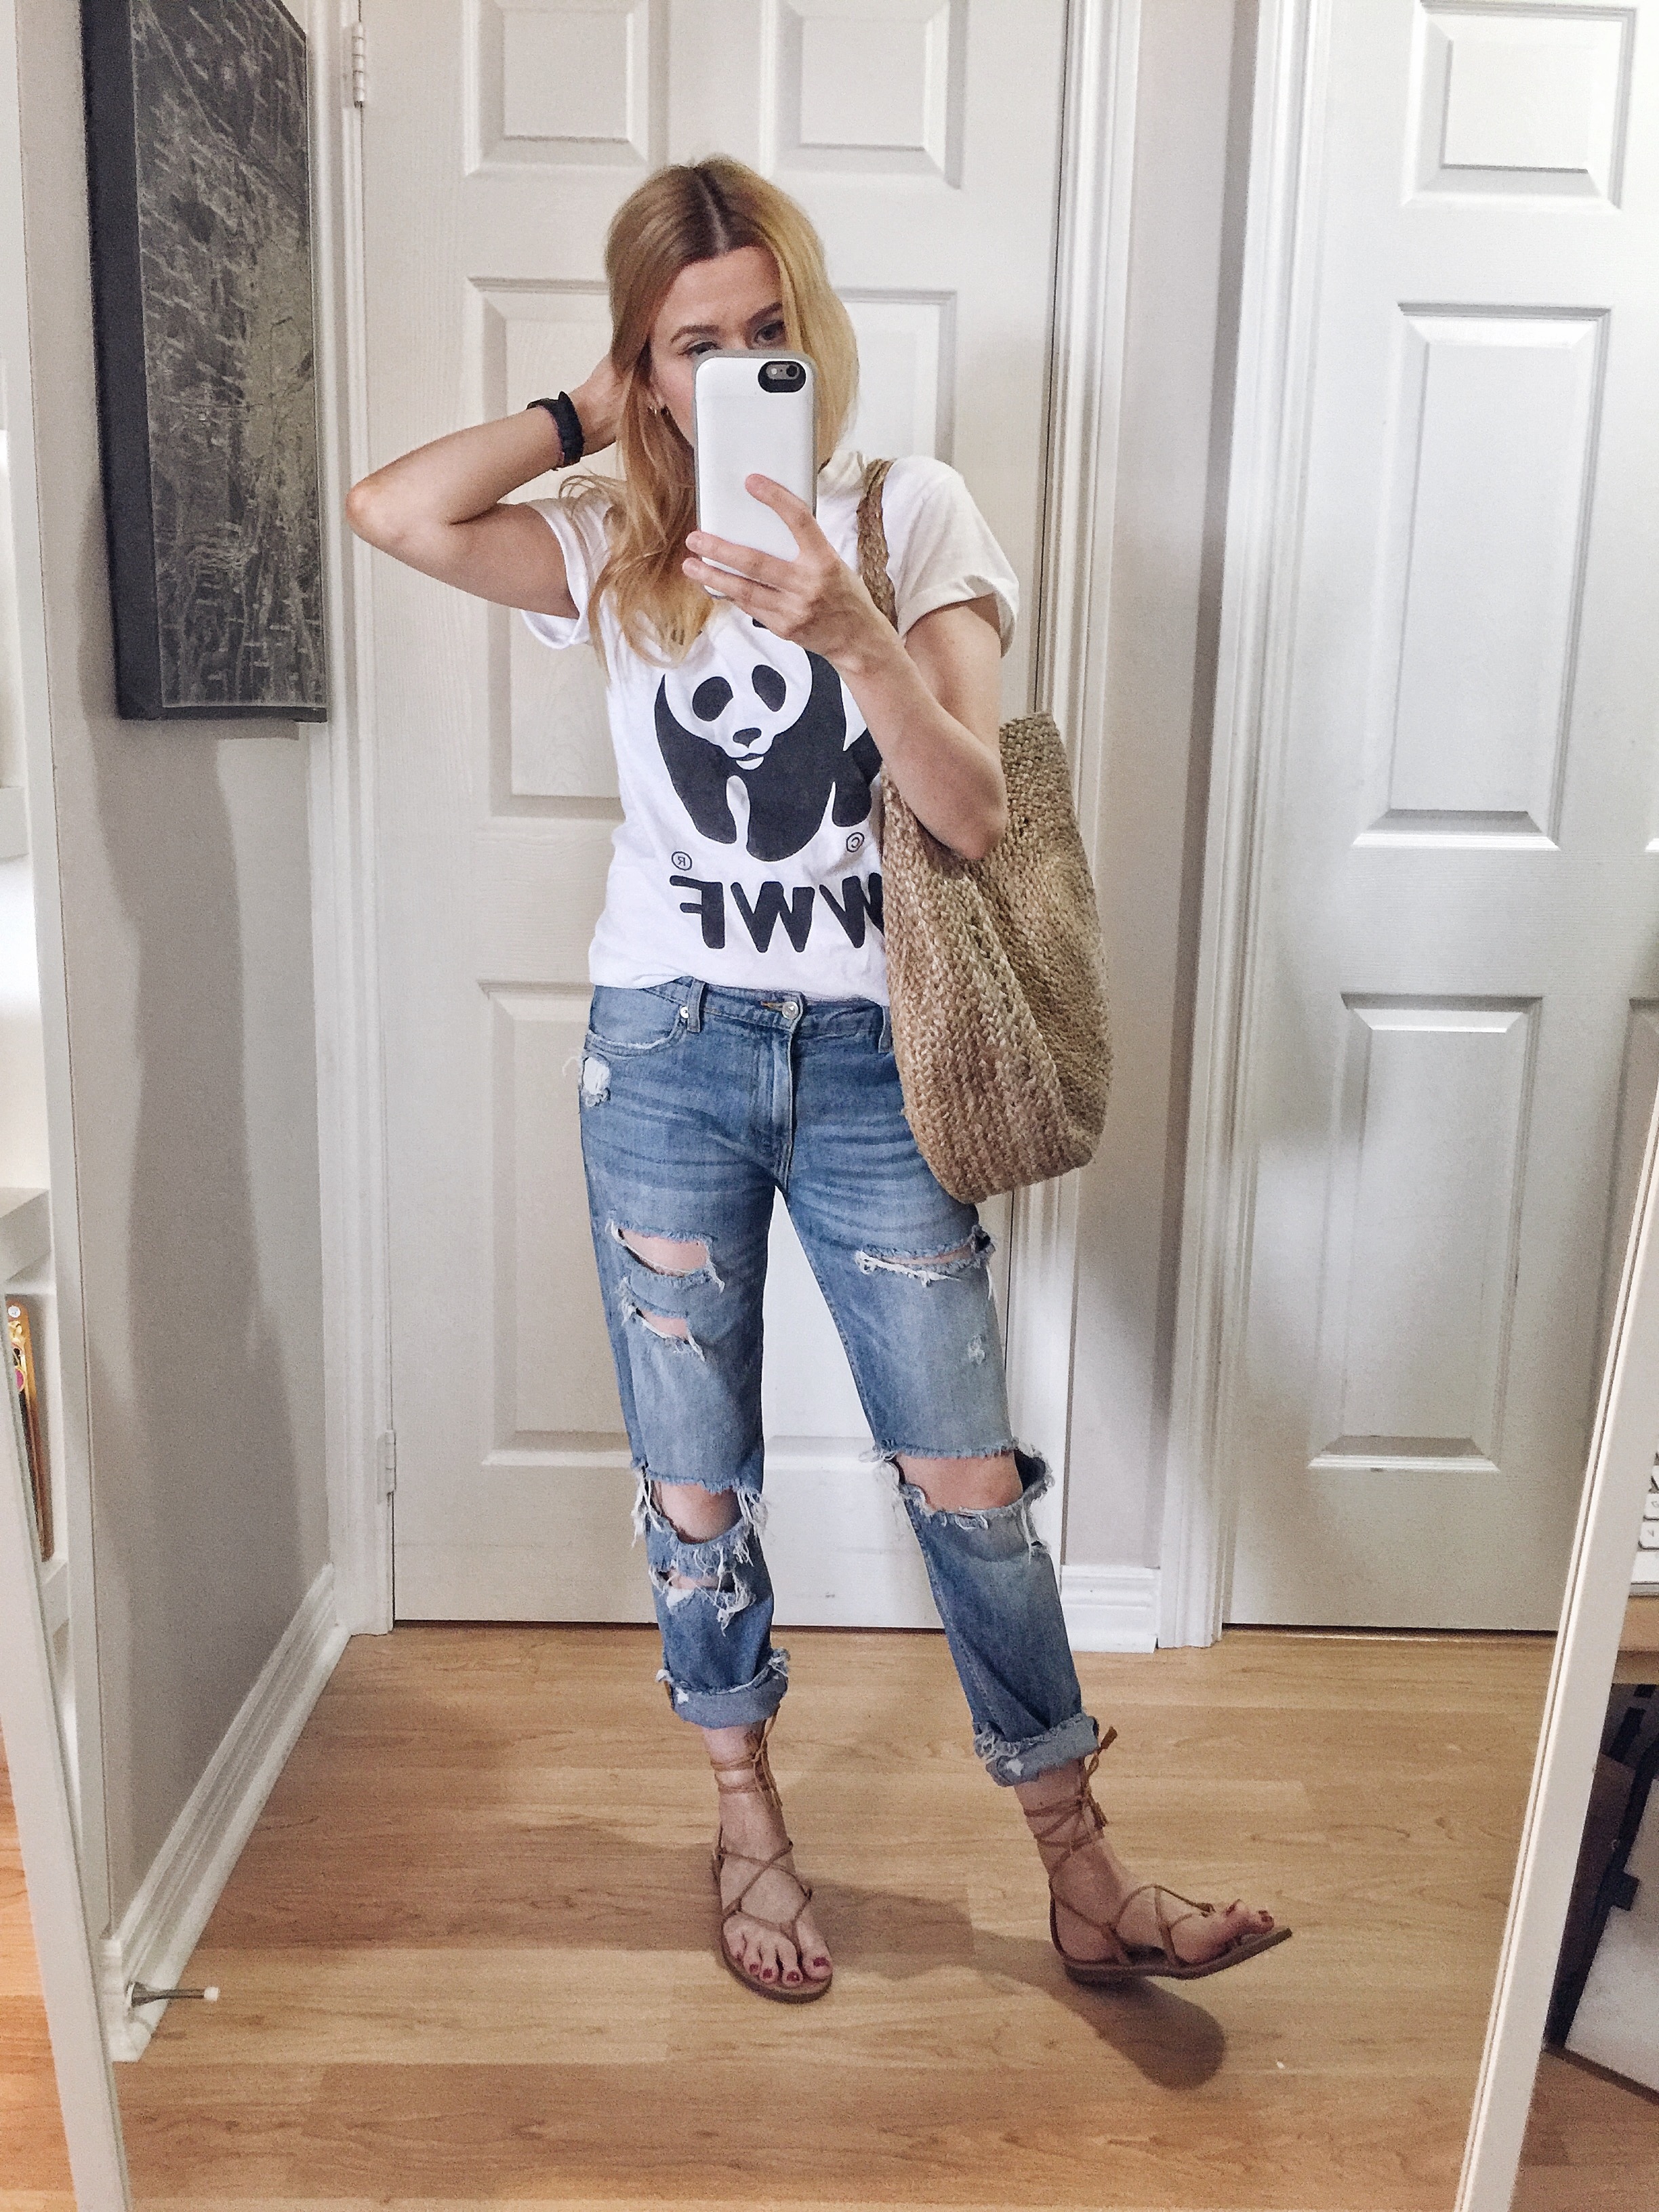 I am wearing a World Wildlife Fund T-shirt, boyfriend jeans, a large woven circle purse, and Madewell Boardwalk Sandals.